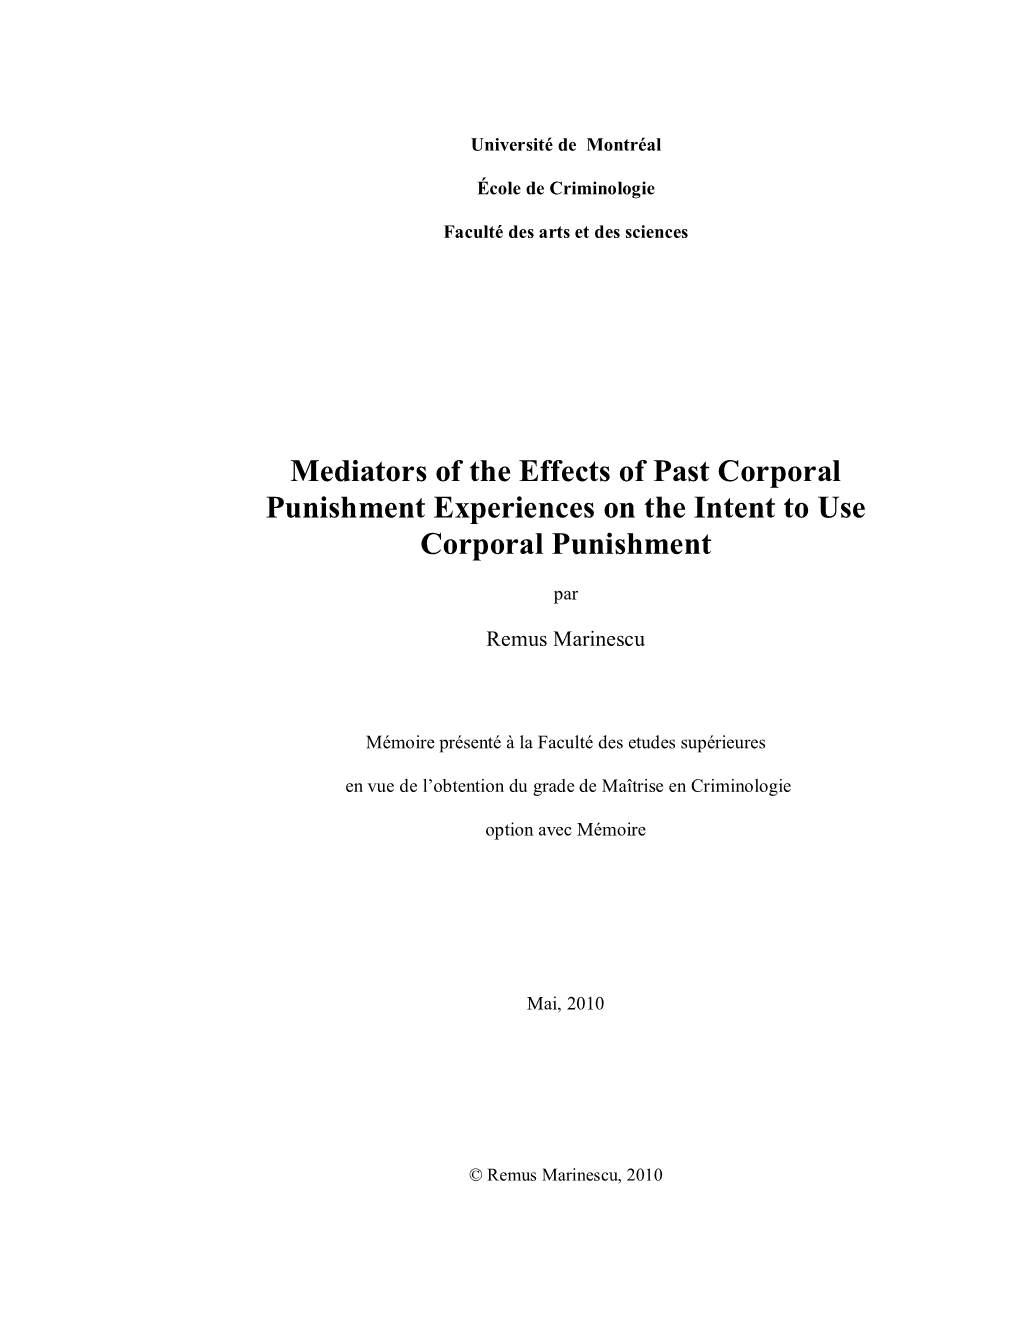 Mediators of the Effects of Past Corporal Punishment Experiences on the Intent to Use Corporal Punishment